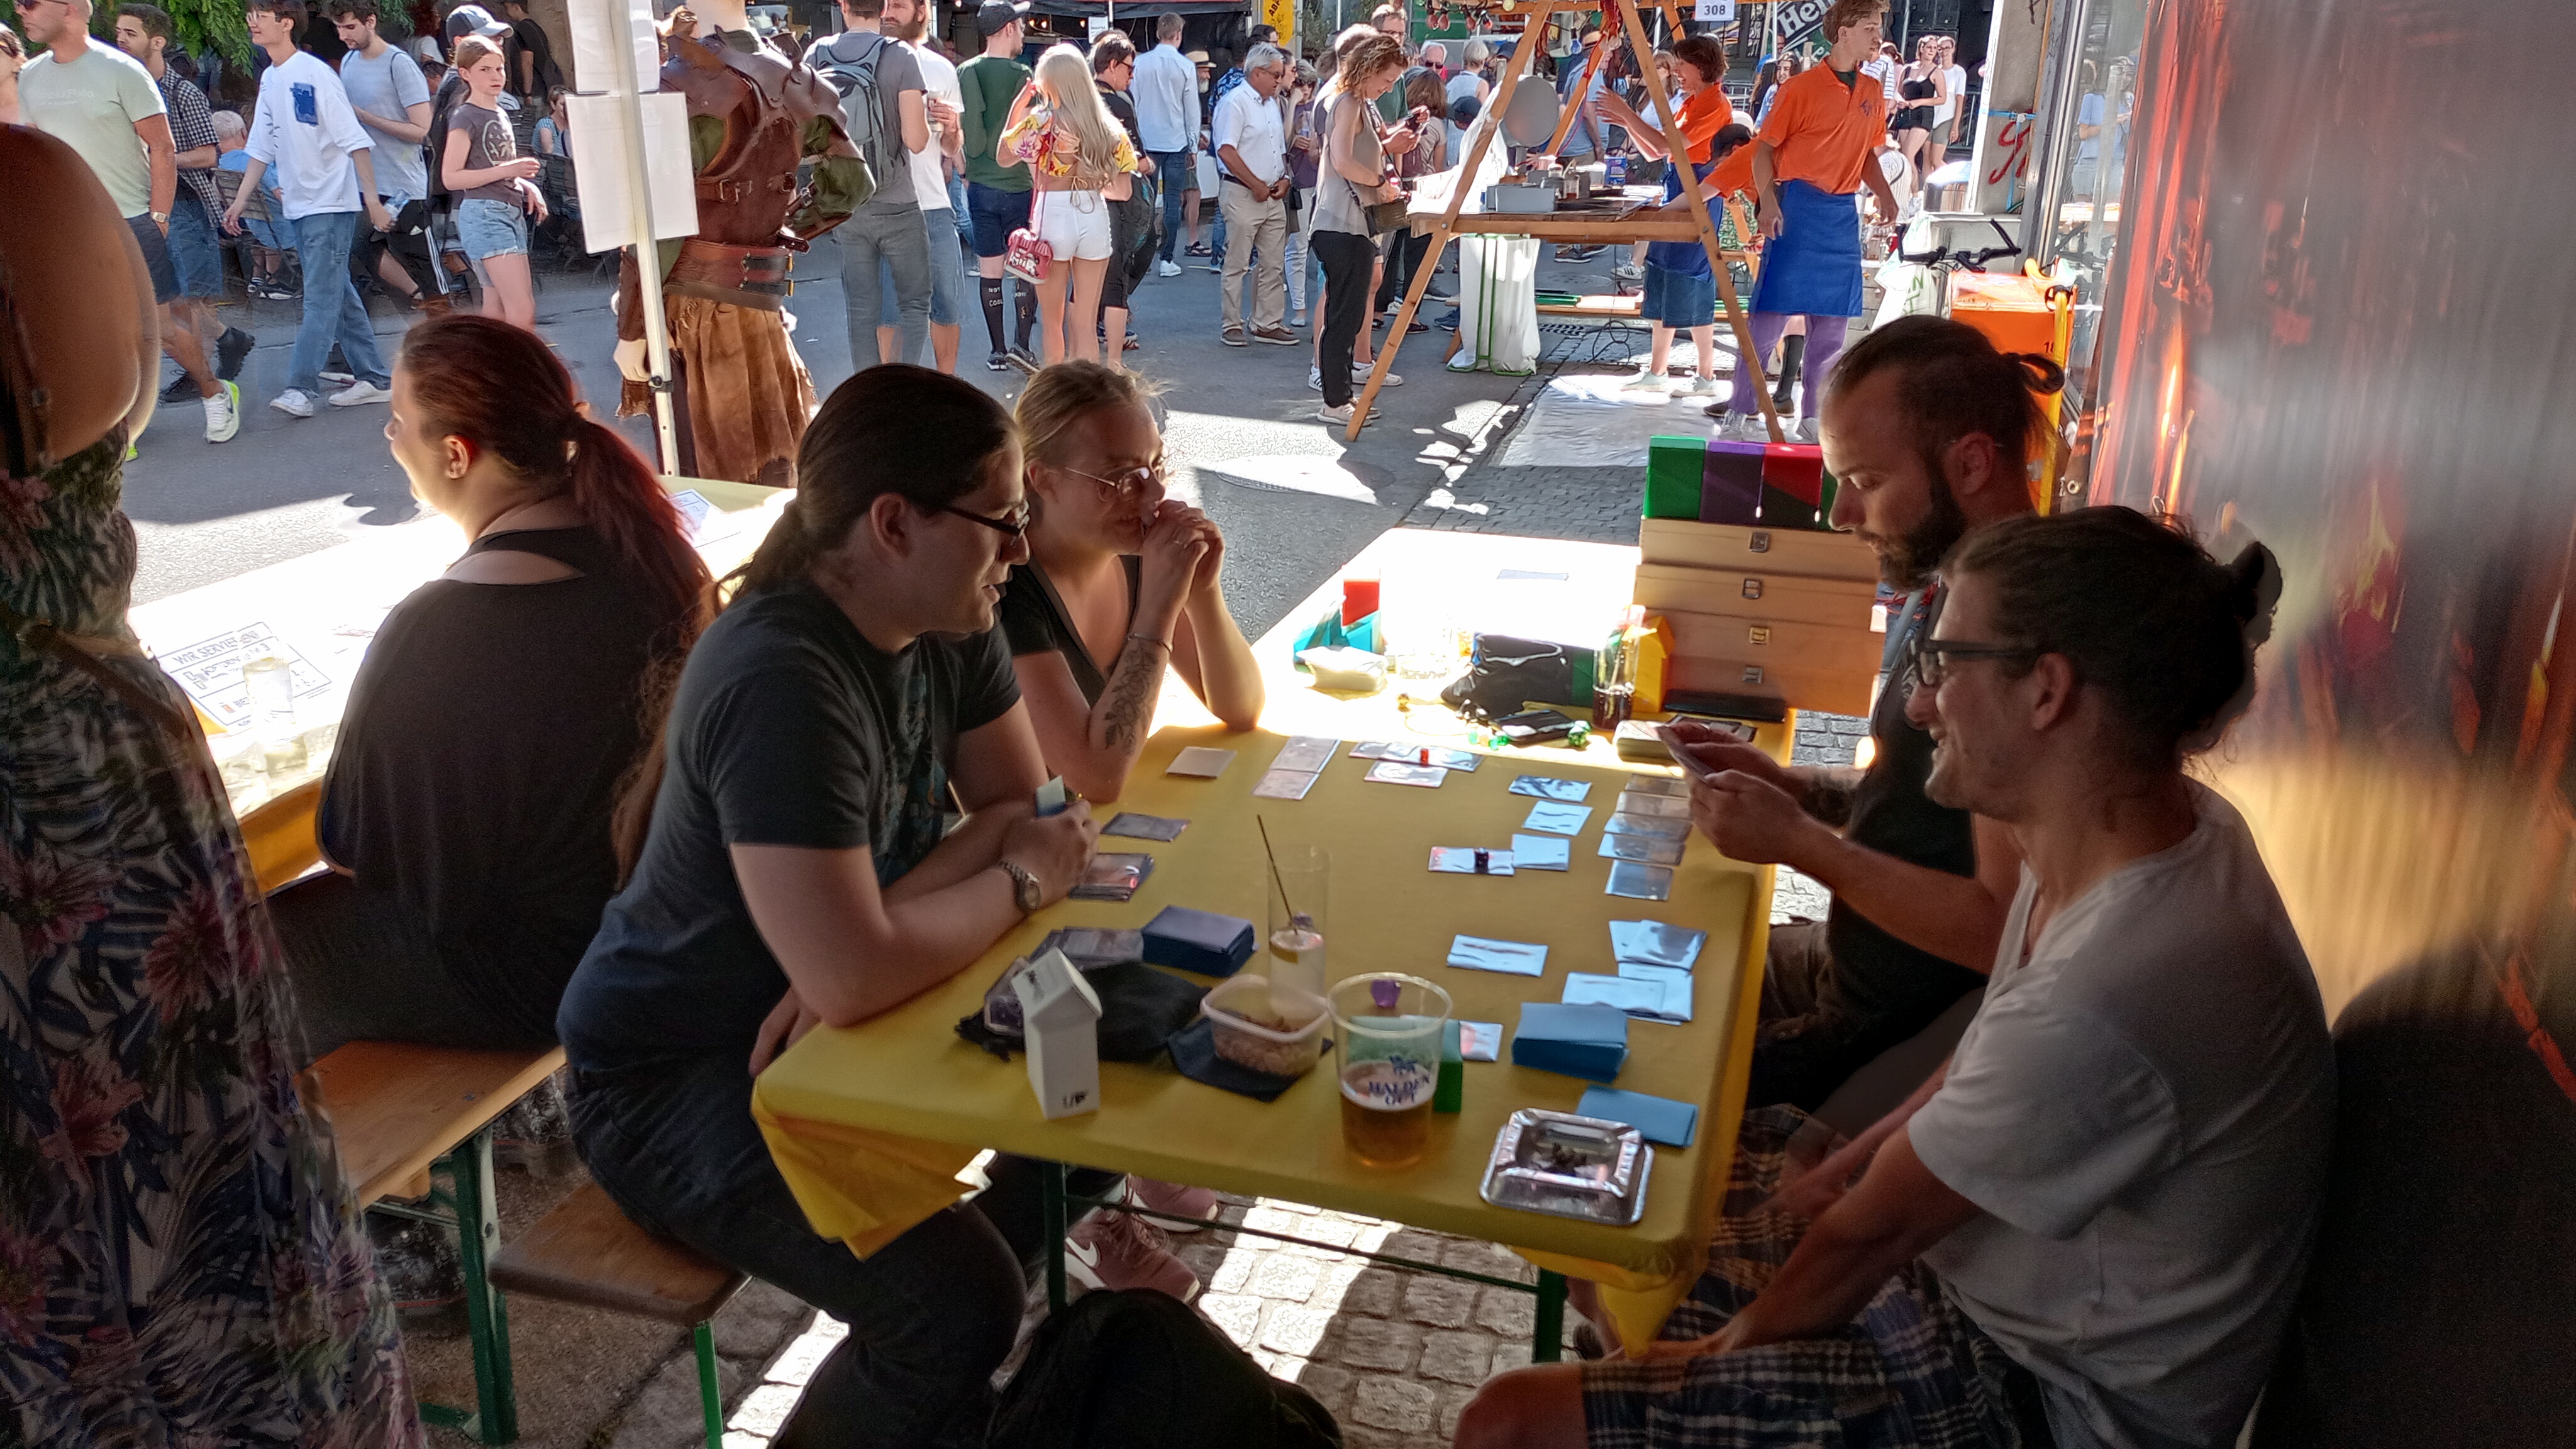 Magic: The Gathering at the ALEA festival booth